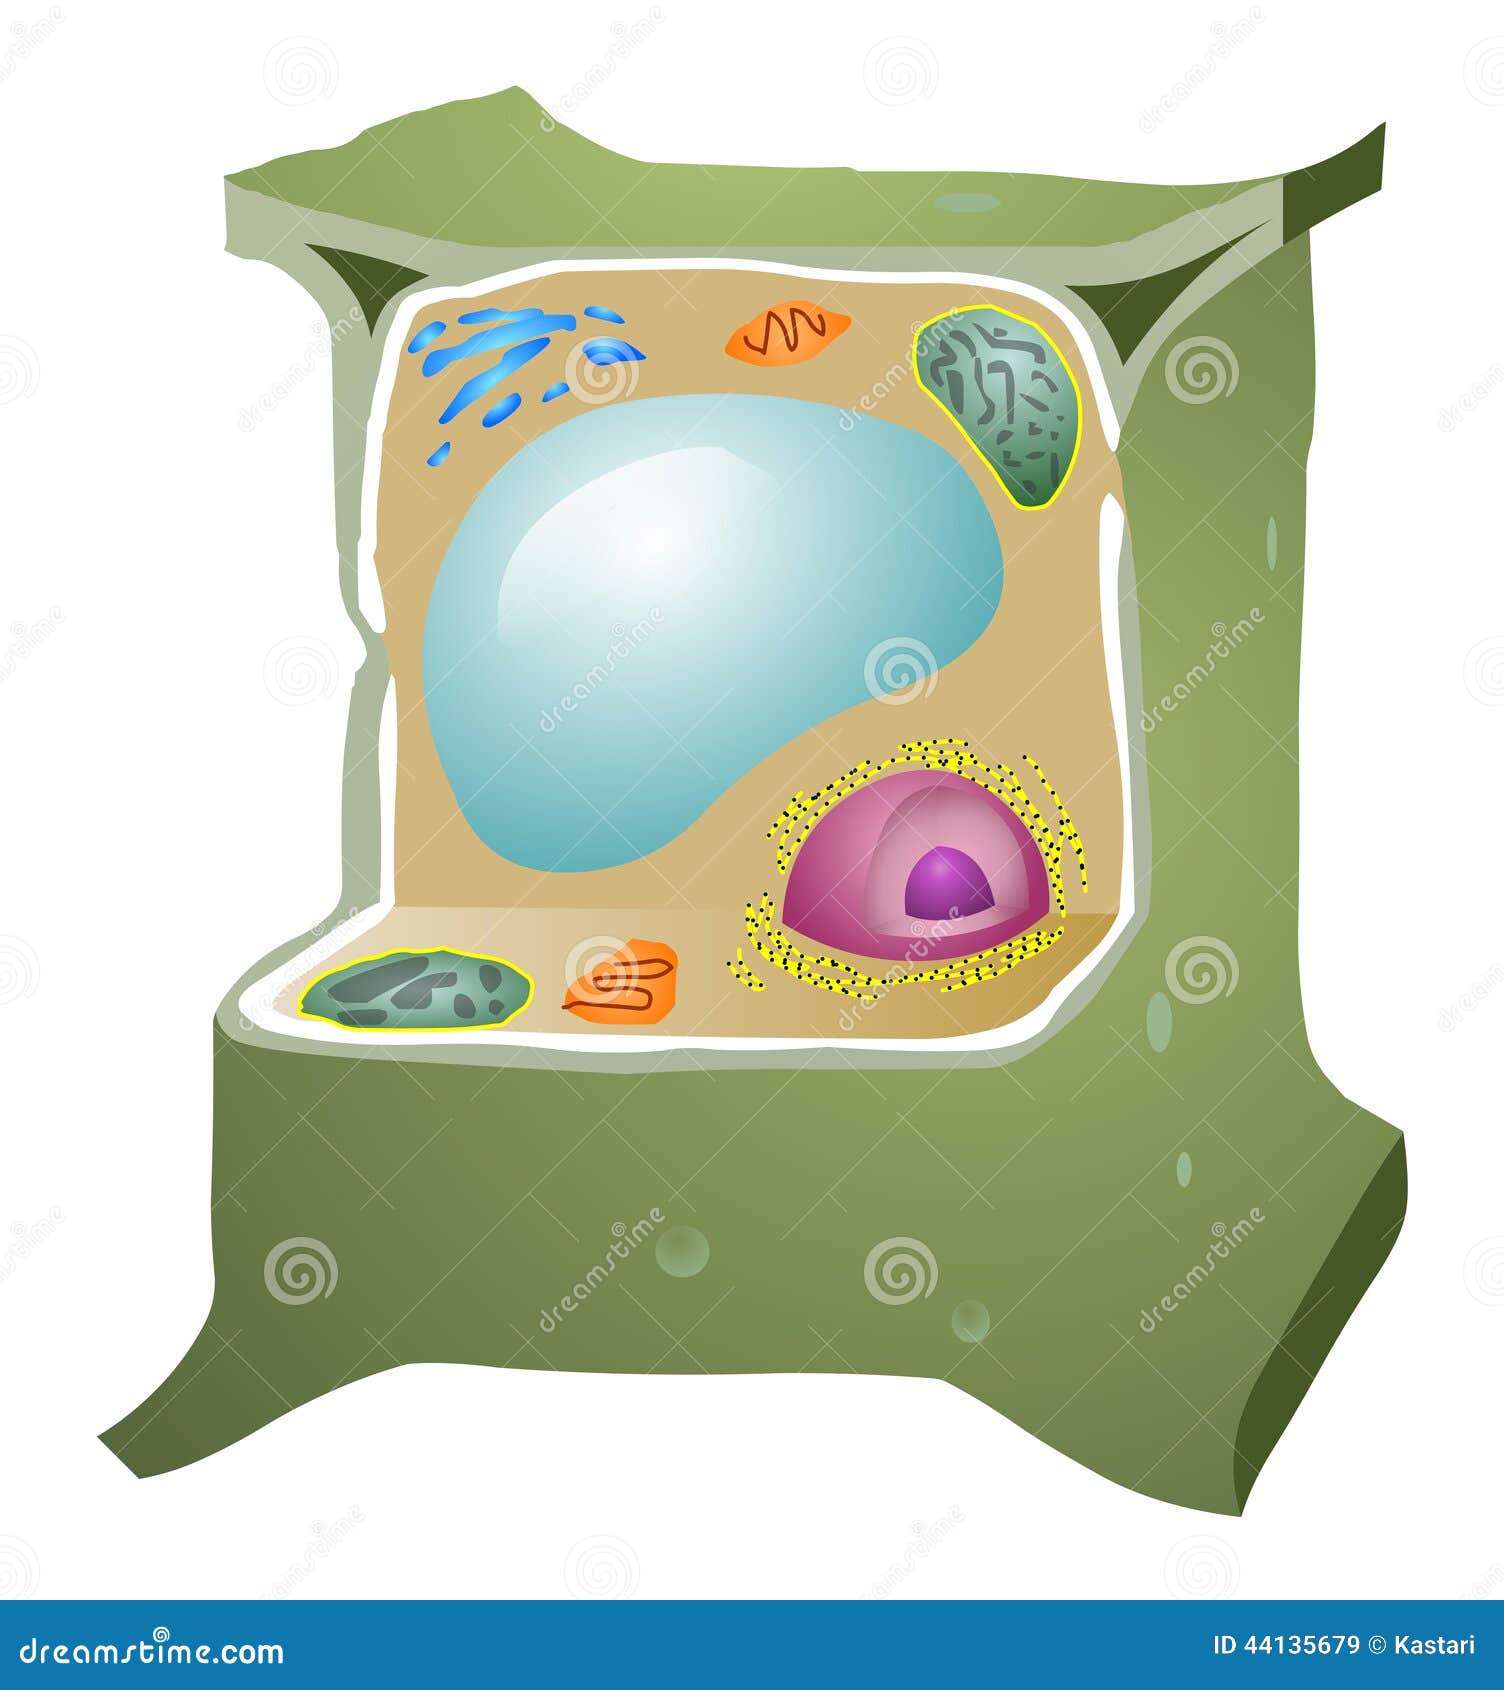 Plant Cell stock vector. Illustration of organelles, biology - 44135679